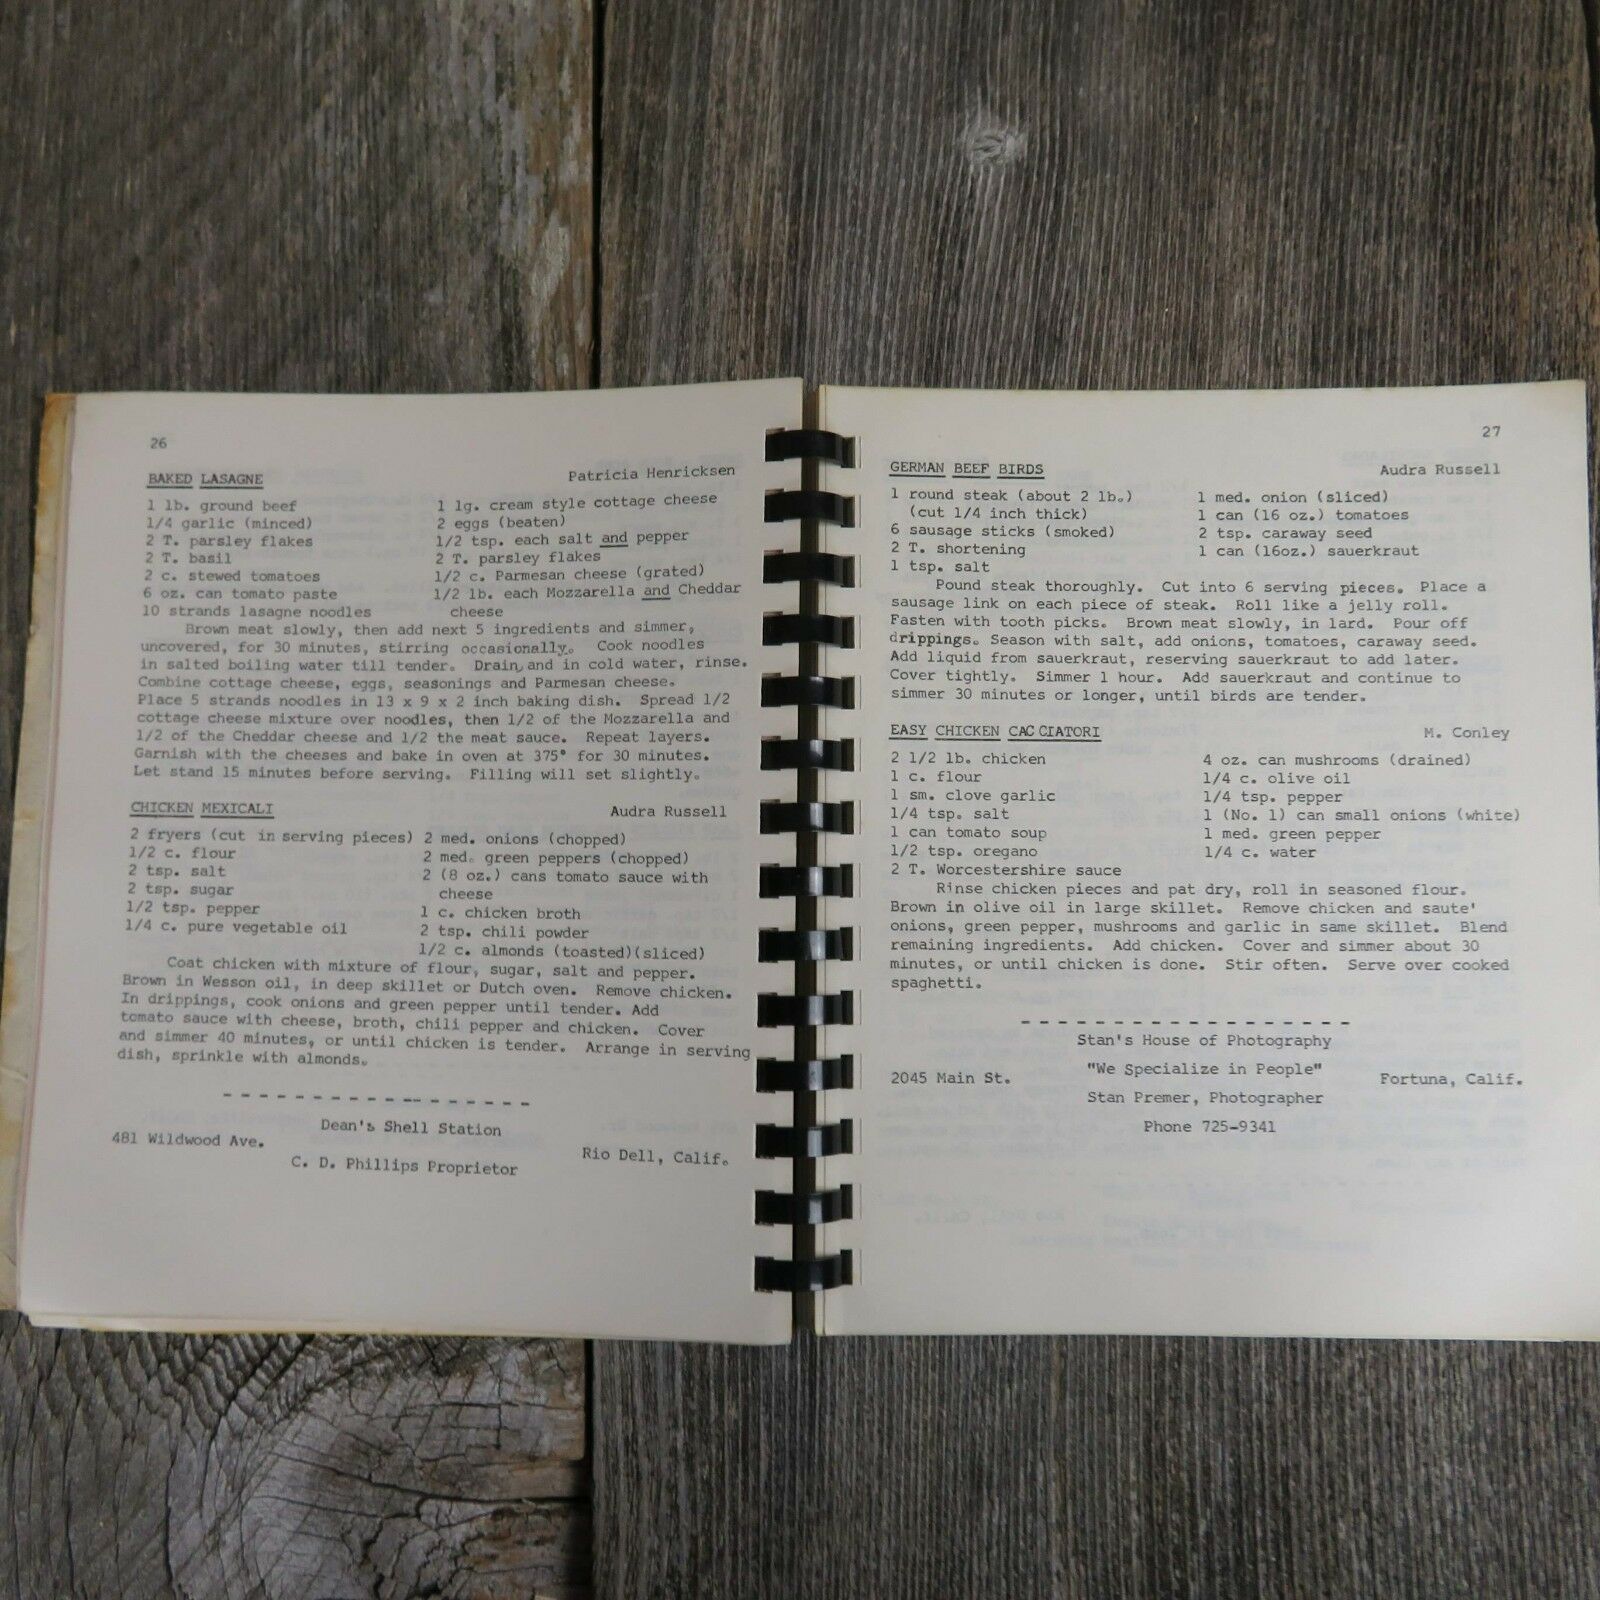 Vintage Veterans Foreign Wars Cookbook California Garberville Ladies Auxiliary - At Grandma's Table